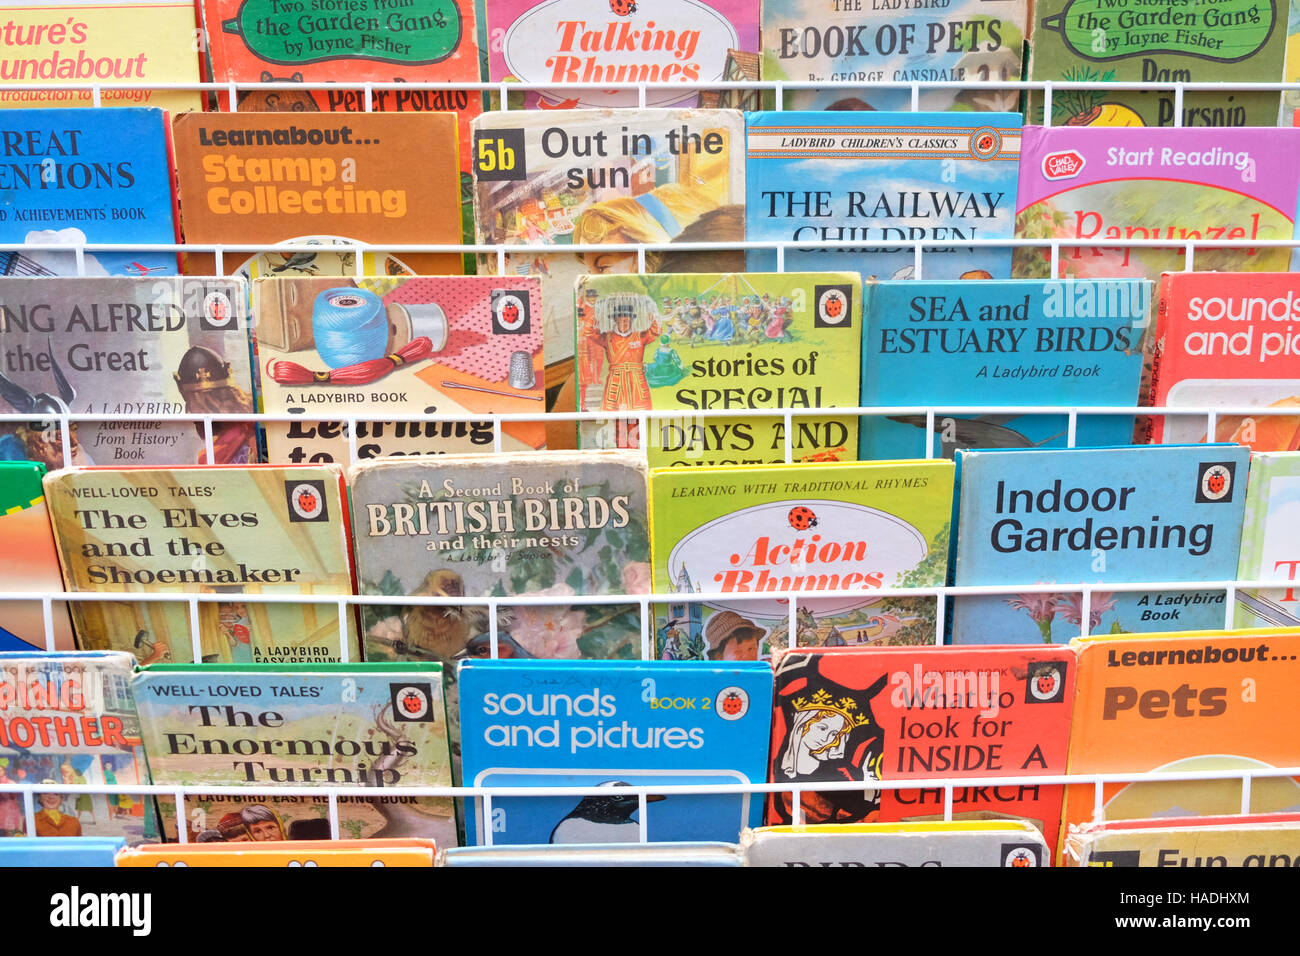 Ladybird books a variety of childrens Ladybird books that were popular in the 1960s 1970s Stock Photo